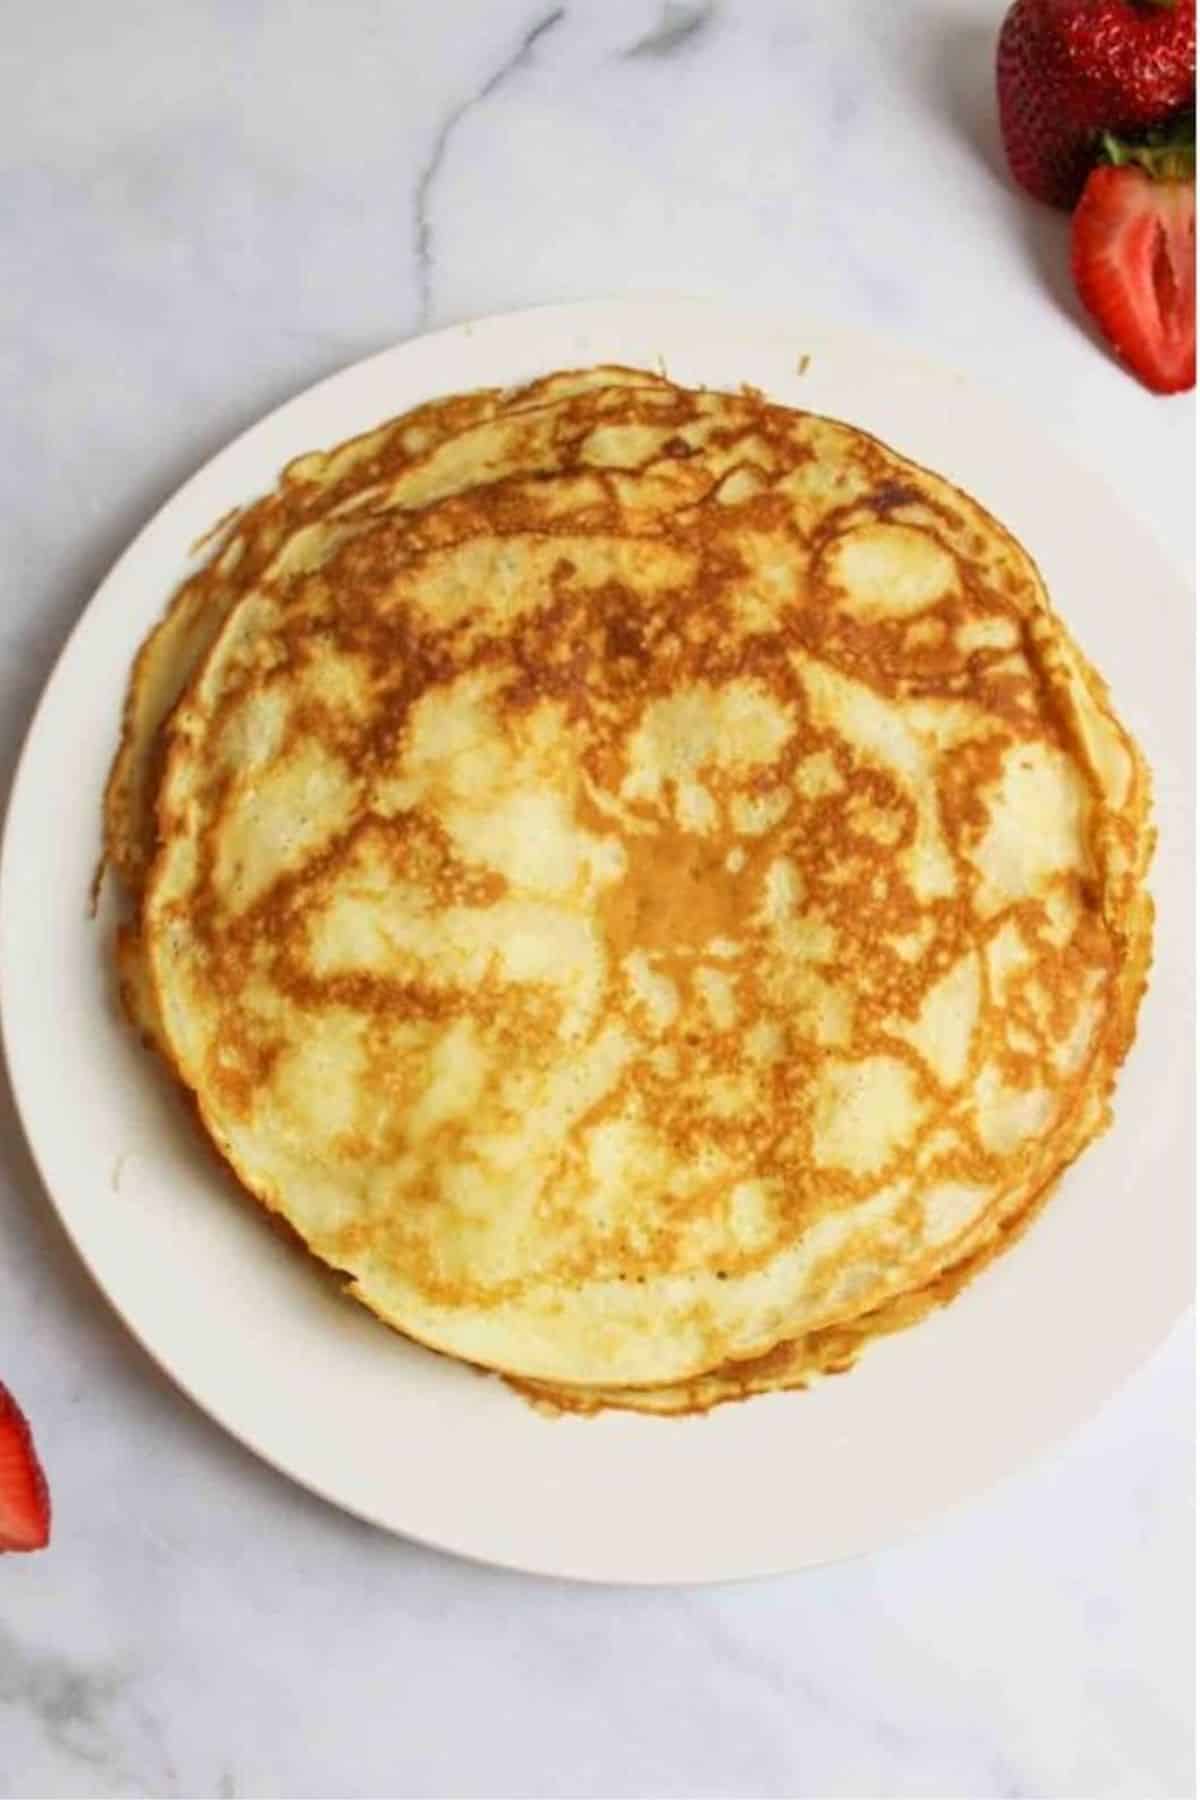 stack of crepes made with pancake mix.